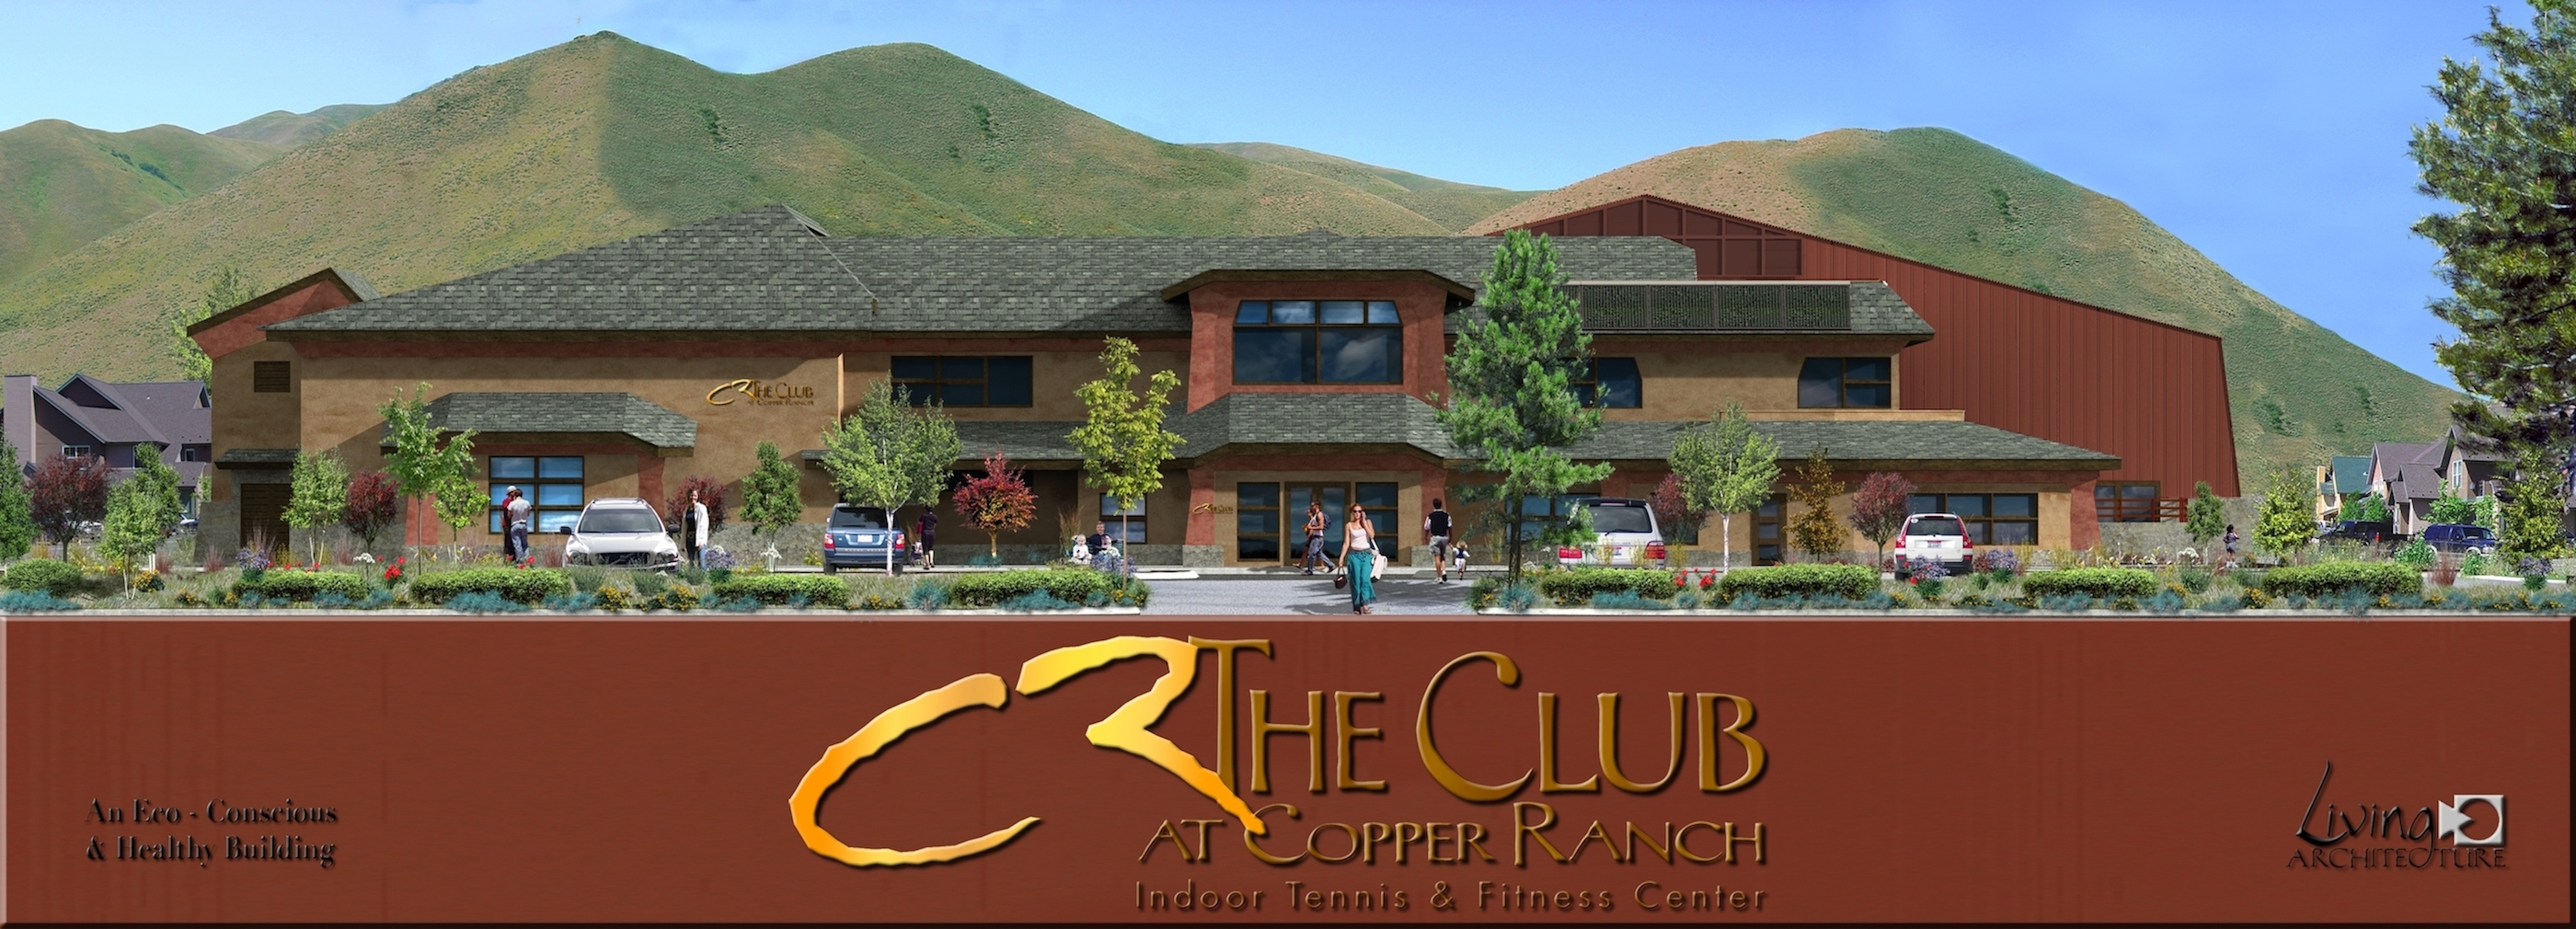 The Club @ Copper Ranch Rendering